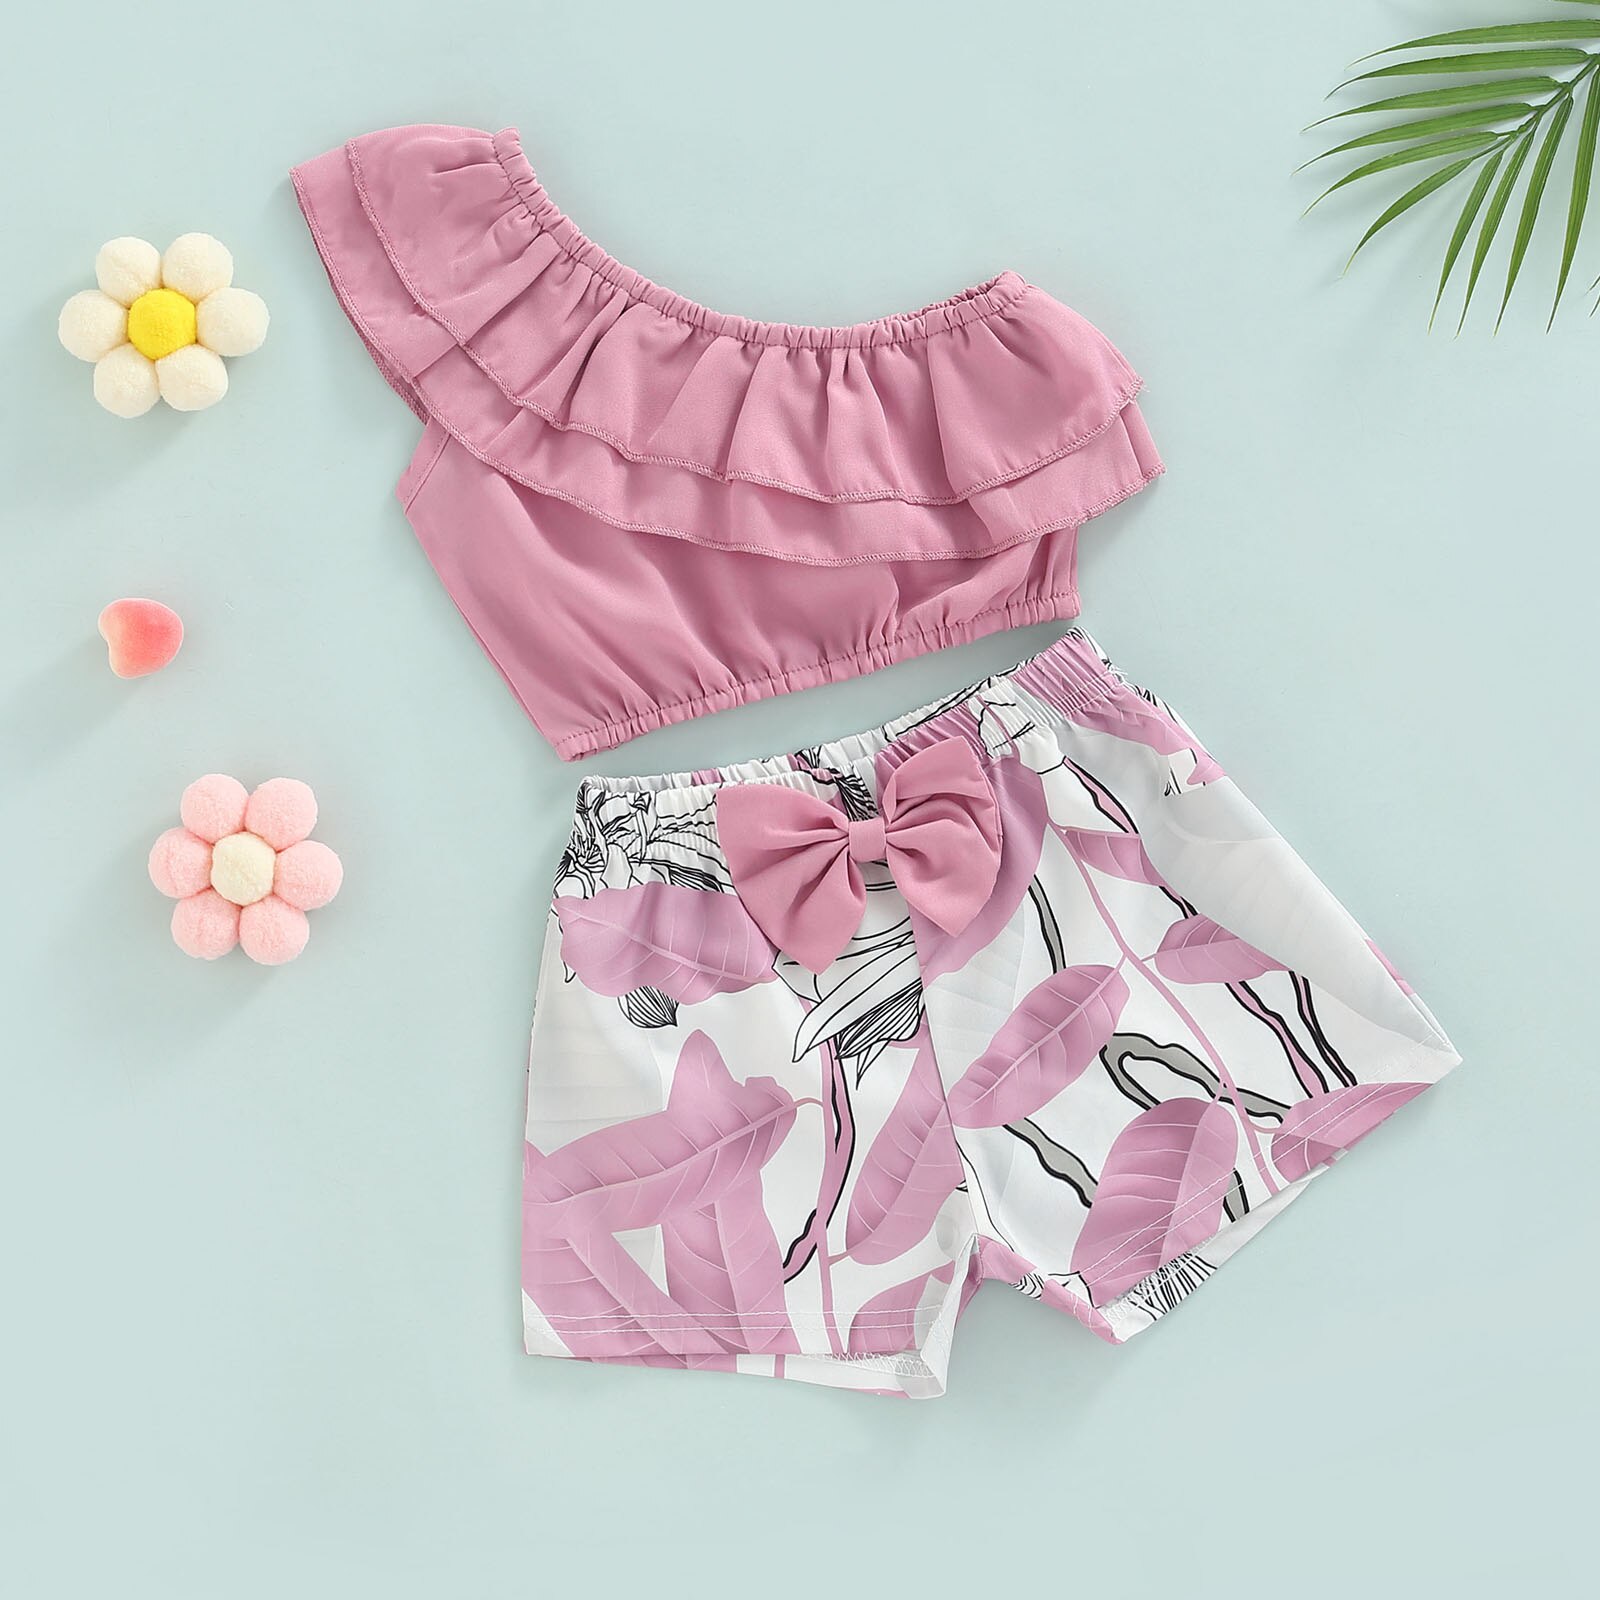 ma-baby-1-6Y-Toddler-Kid-Girls-Clothes-Set-Ruffle-One-Shoulder-Vest-Tops-Bow-Shorts-1